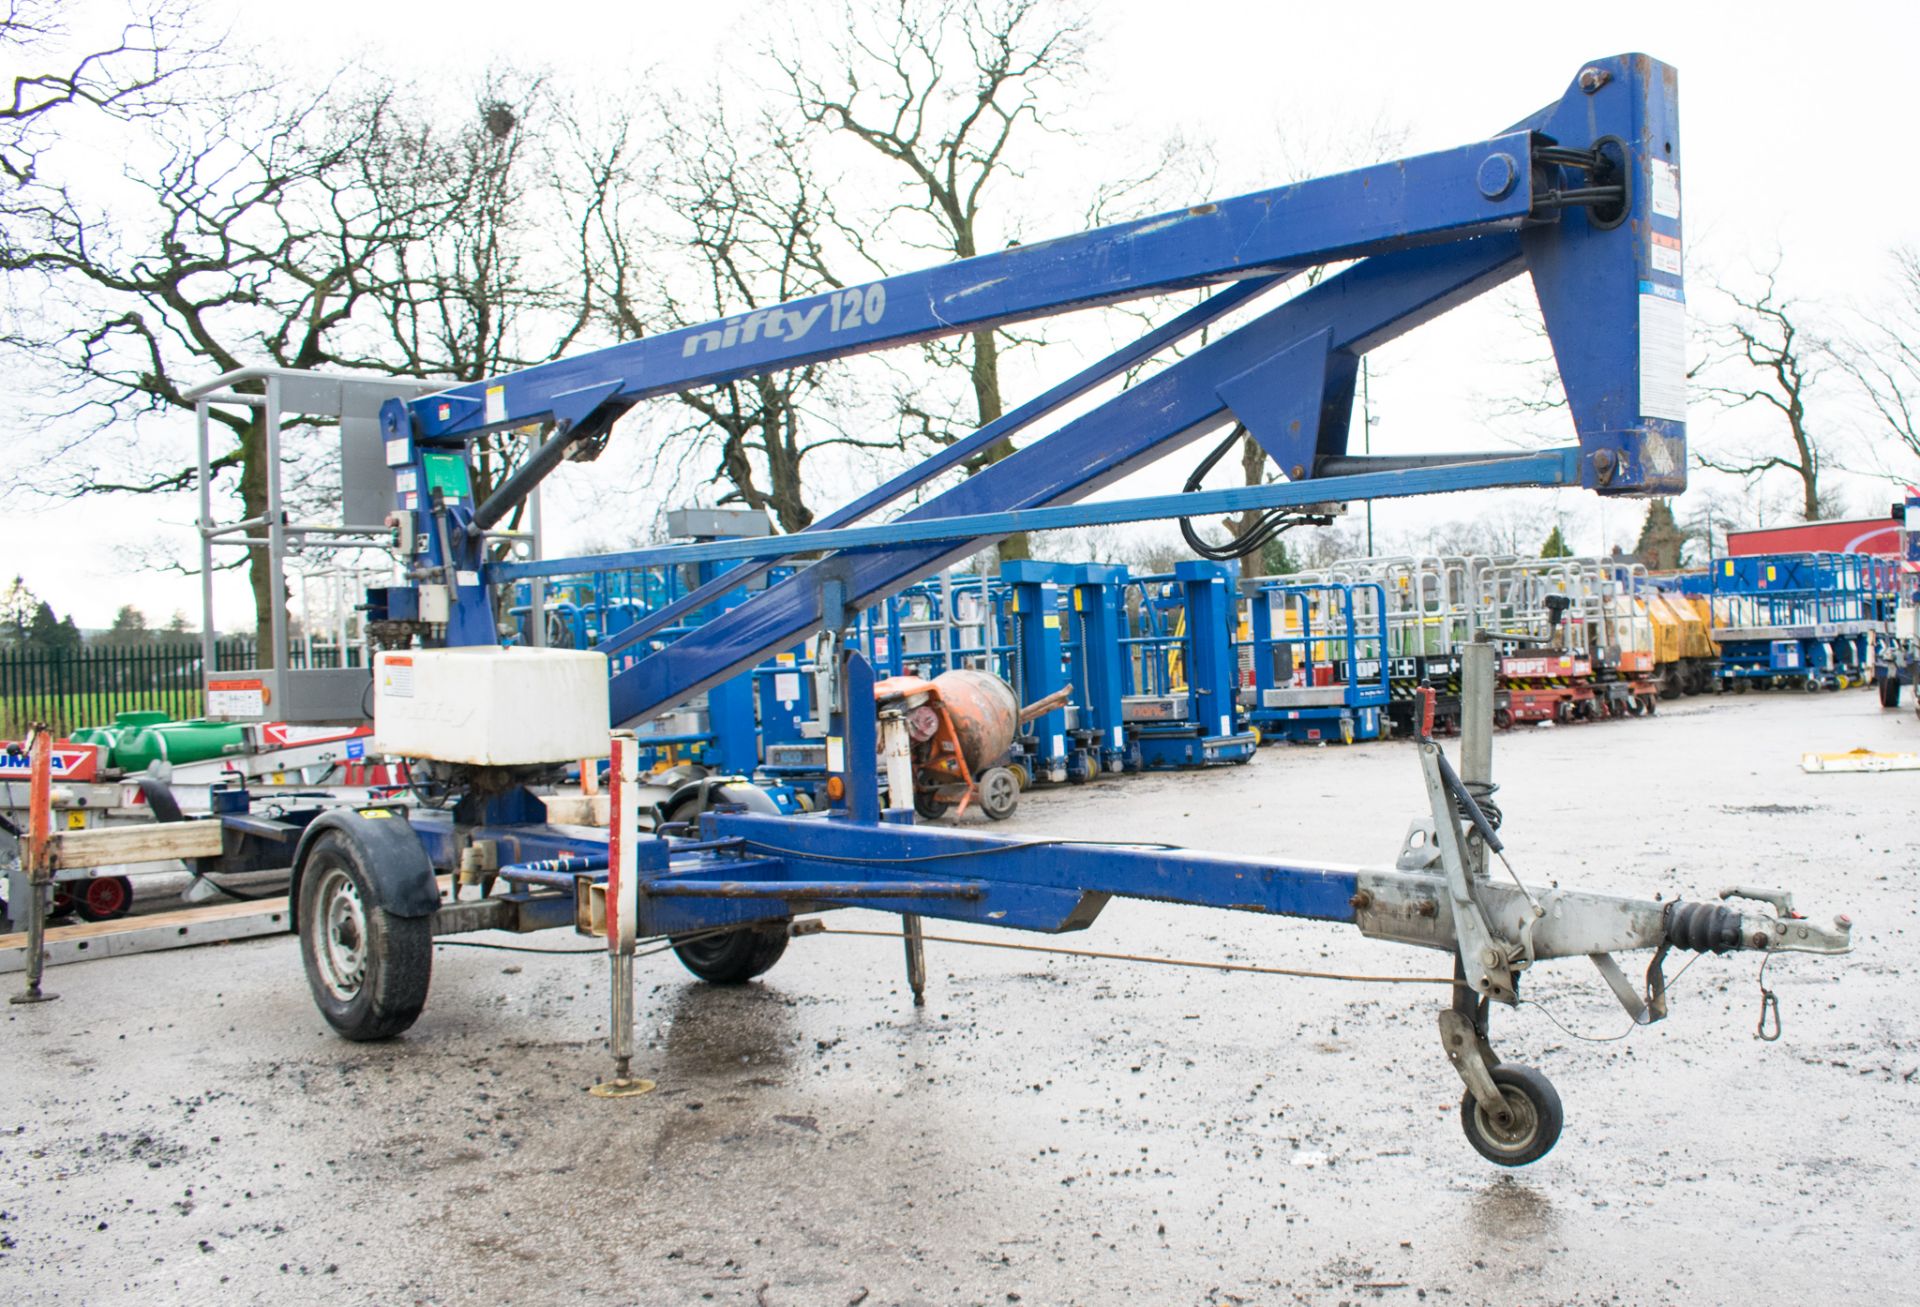 Nifty 120 ME fast tow articulated boom lift access platform Year: 2005 S/N: 0113266 - Image 2 of 9